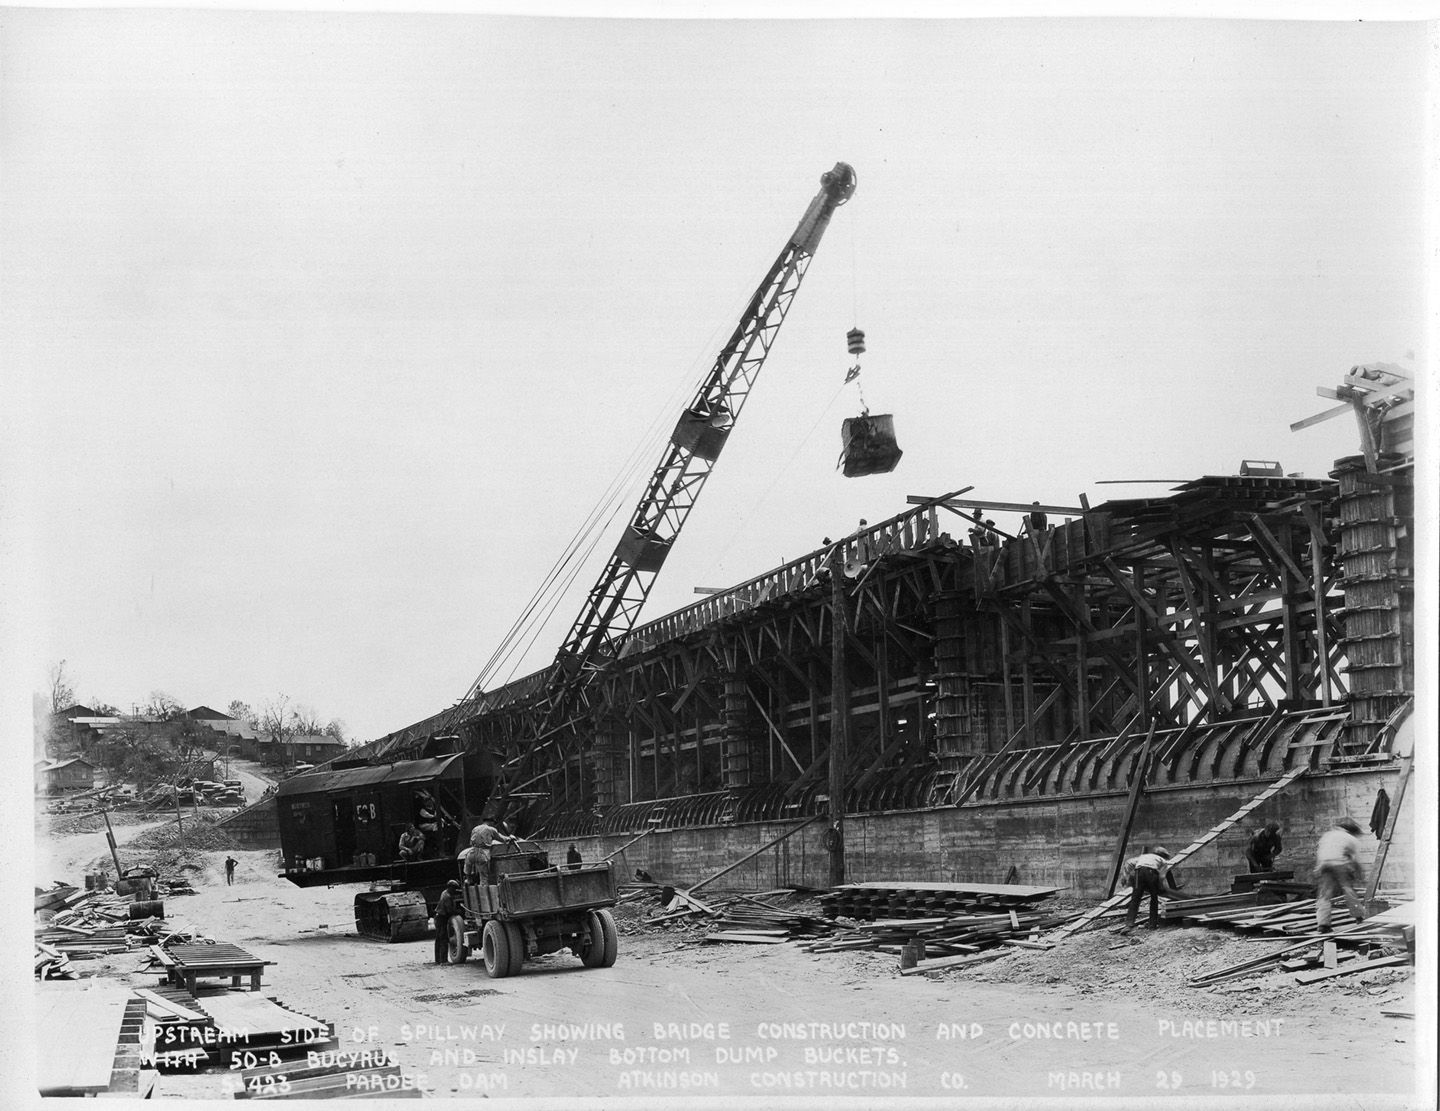 Upstream side of spillway showing bridge construction and concrete placement with 50-8 Bucyrus and inslay bottom dump buckets. (March 1929)	